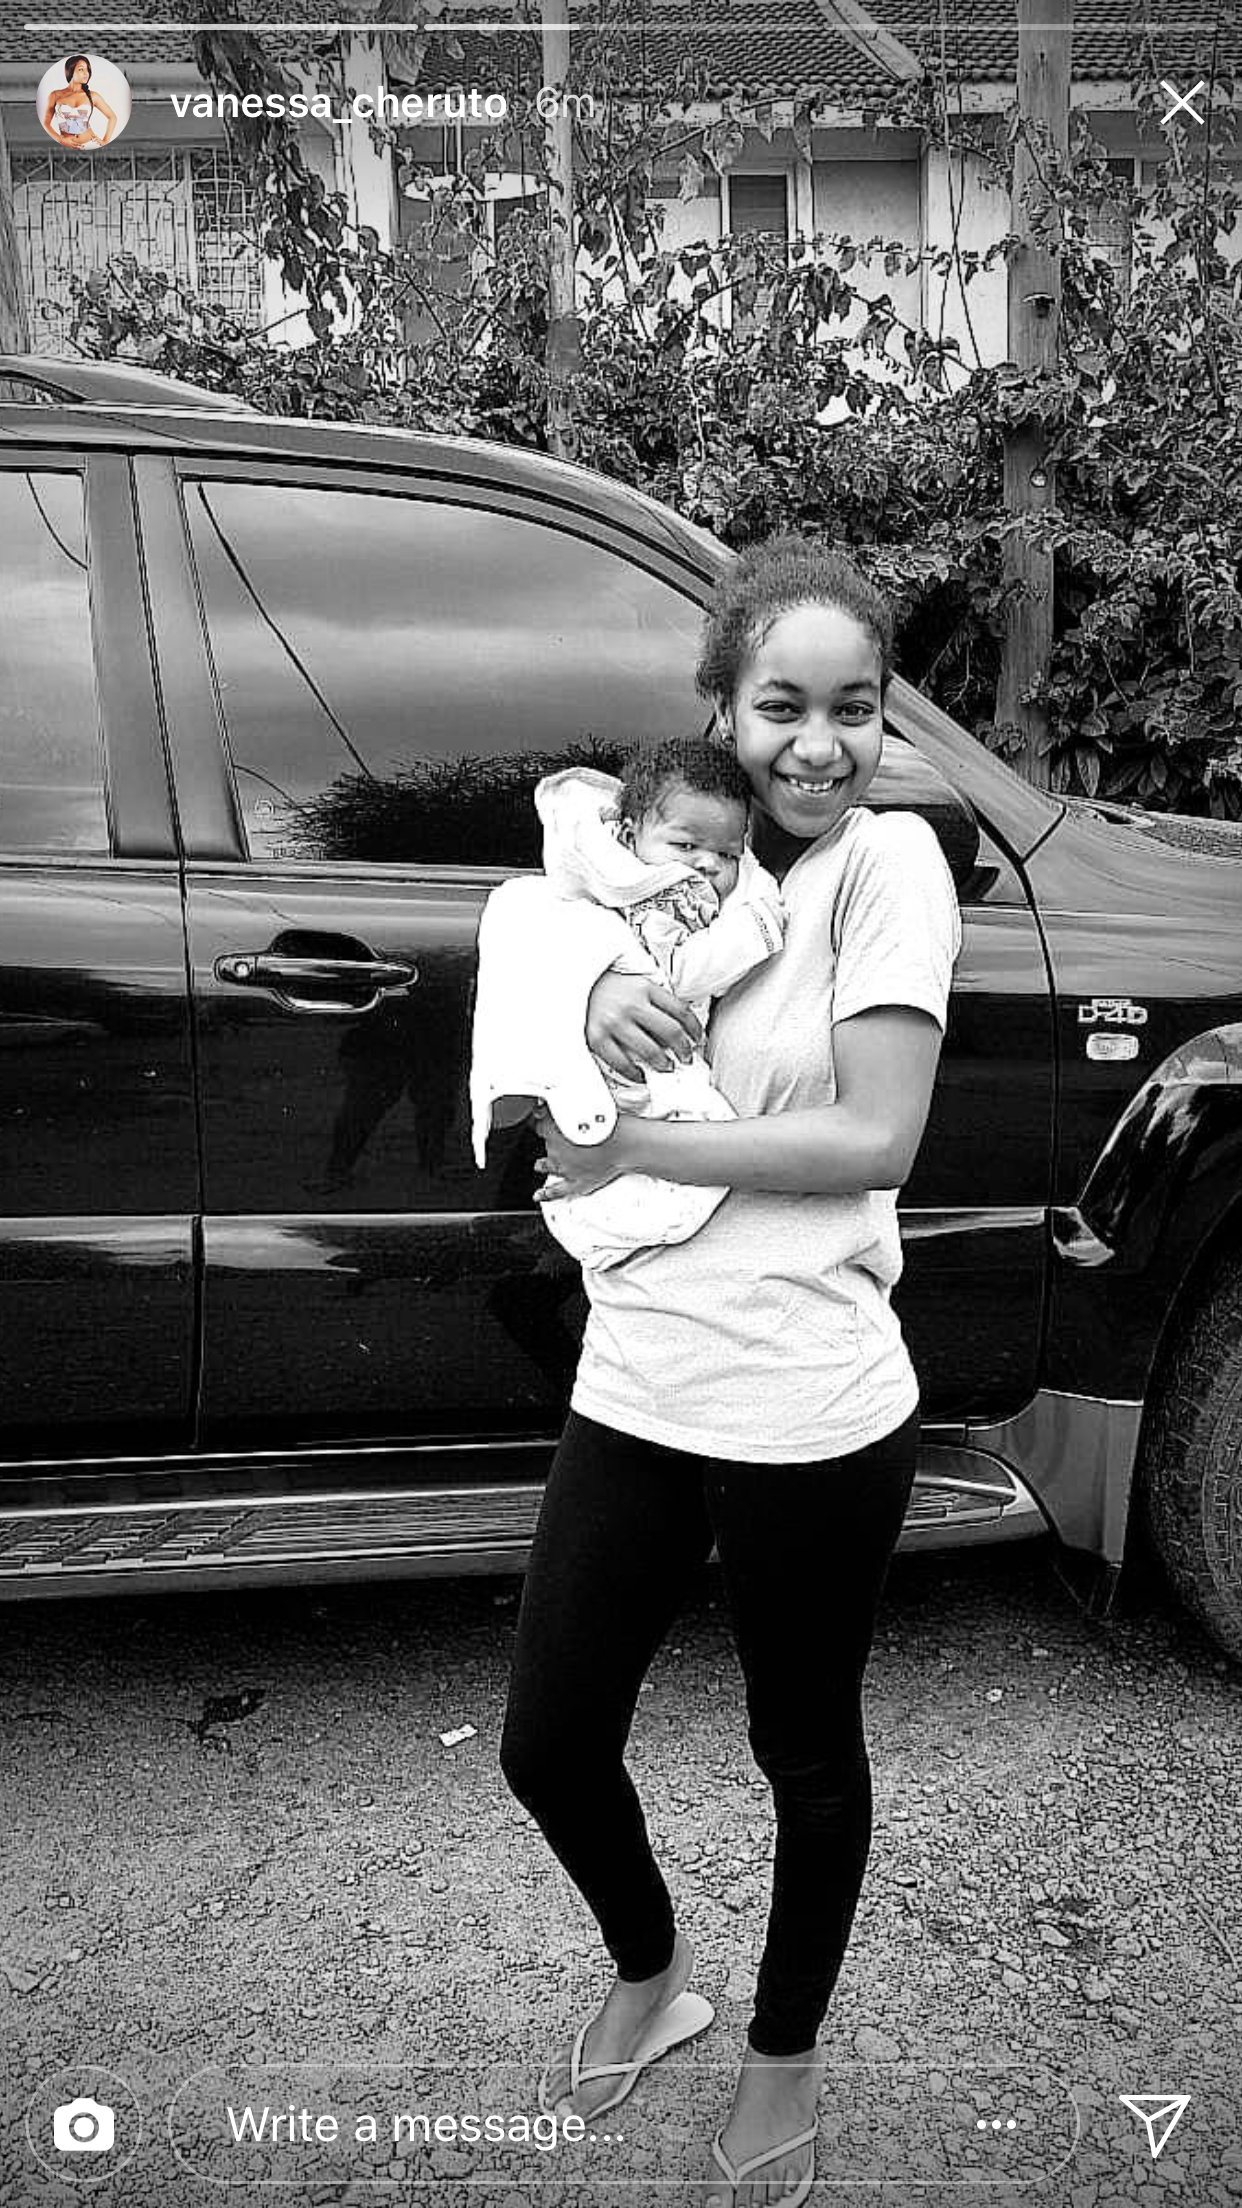 vanessa chettle and her first daughter